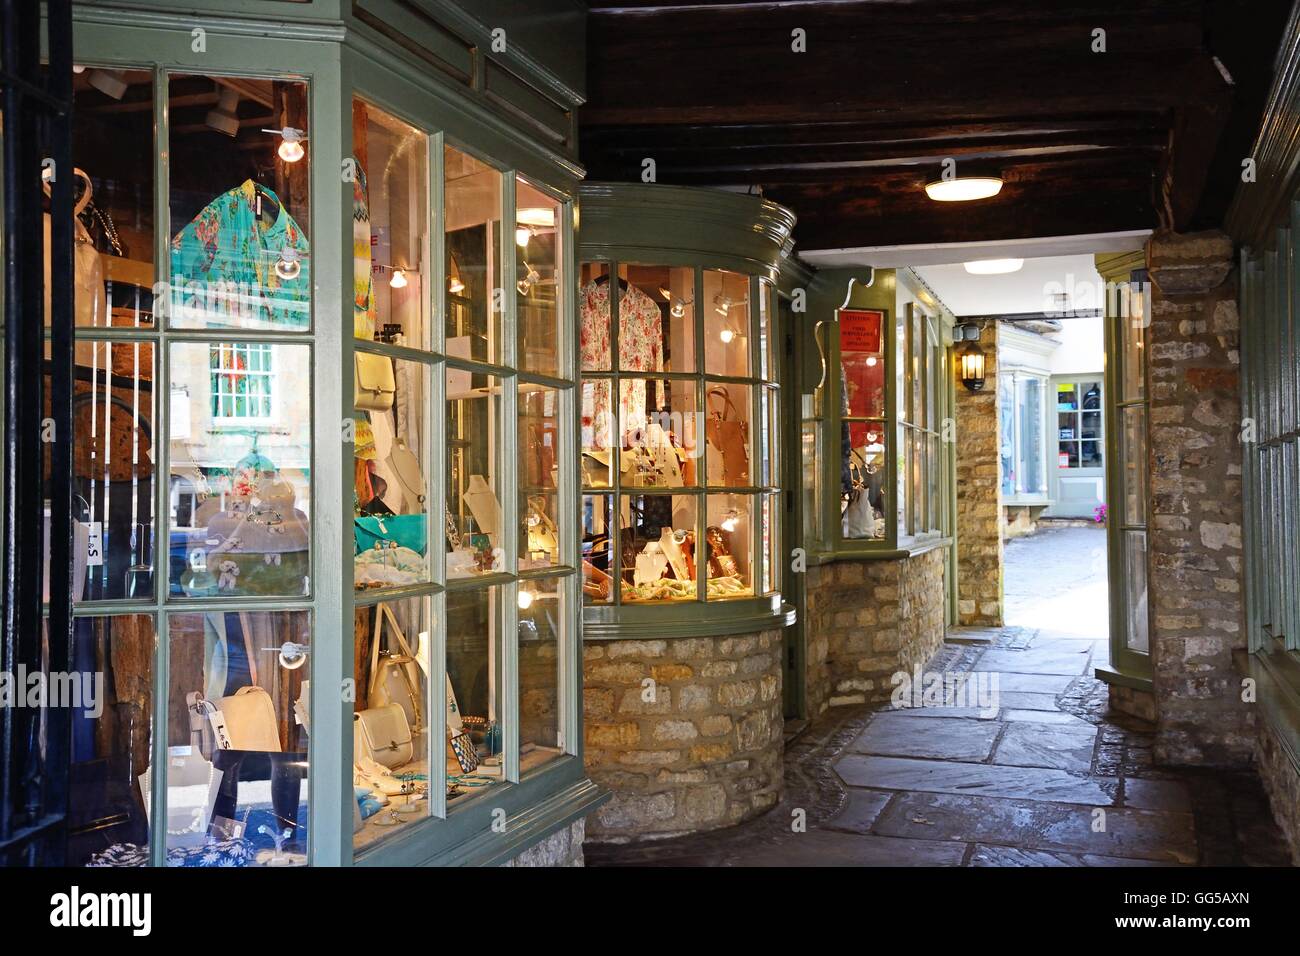 Small shops in a traditional old shopping arcade along The Hill shopping street, Burford, Oxfordshire, England, UK, Europe. Stock Photo